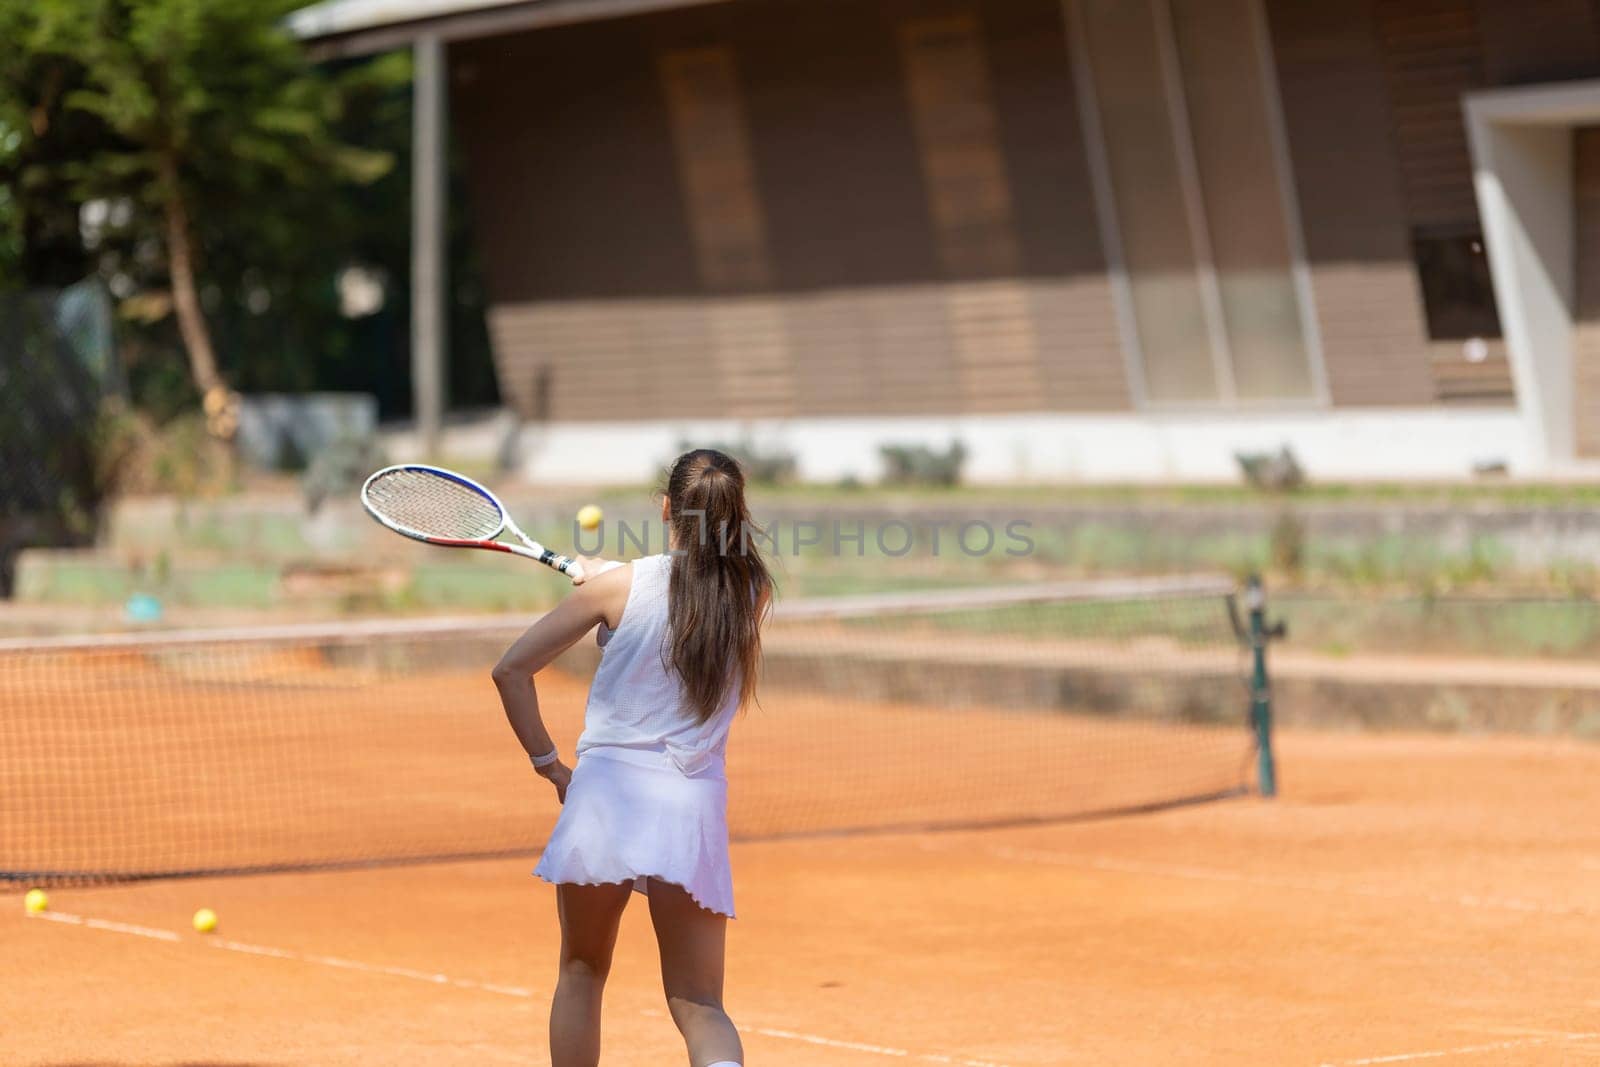 A woman is playing tennis on a clay court. She is wearing a white dress and holding a tennis racket